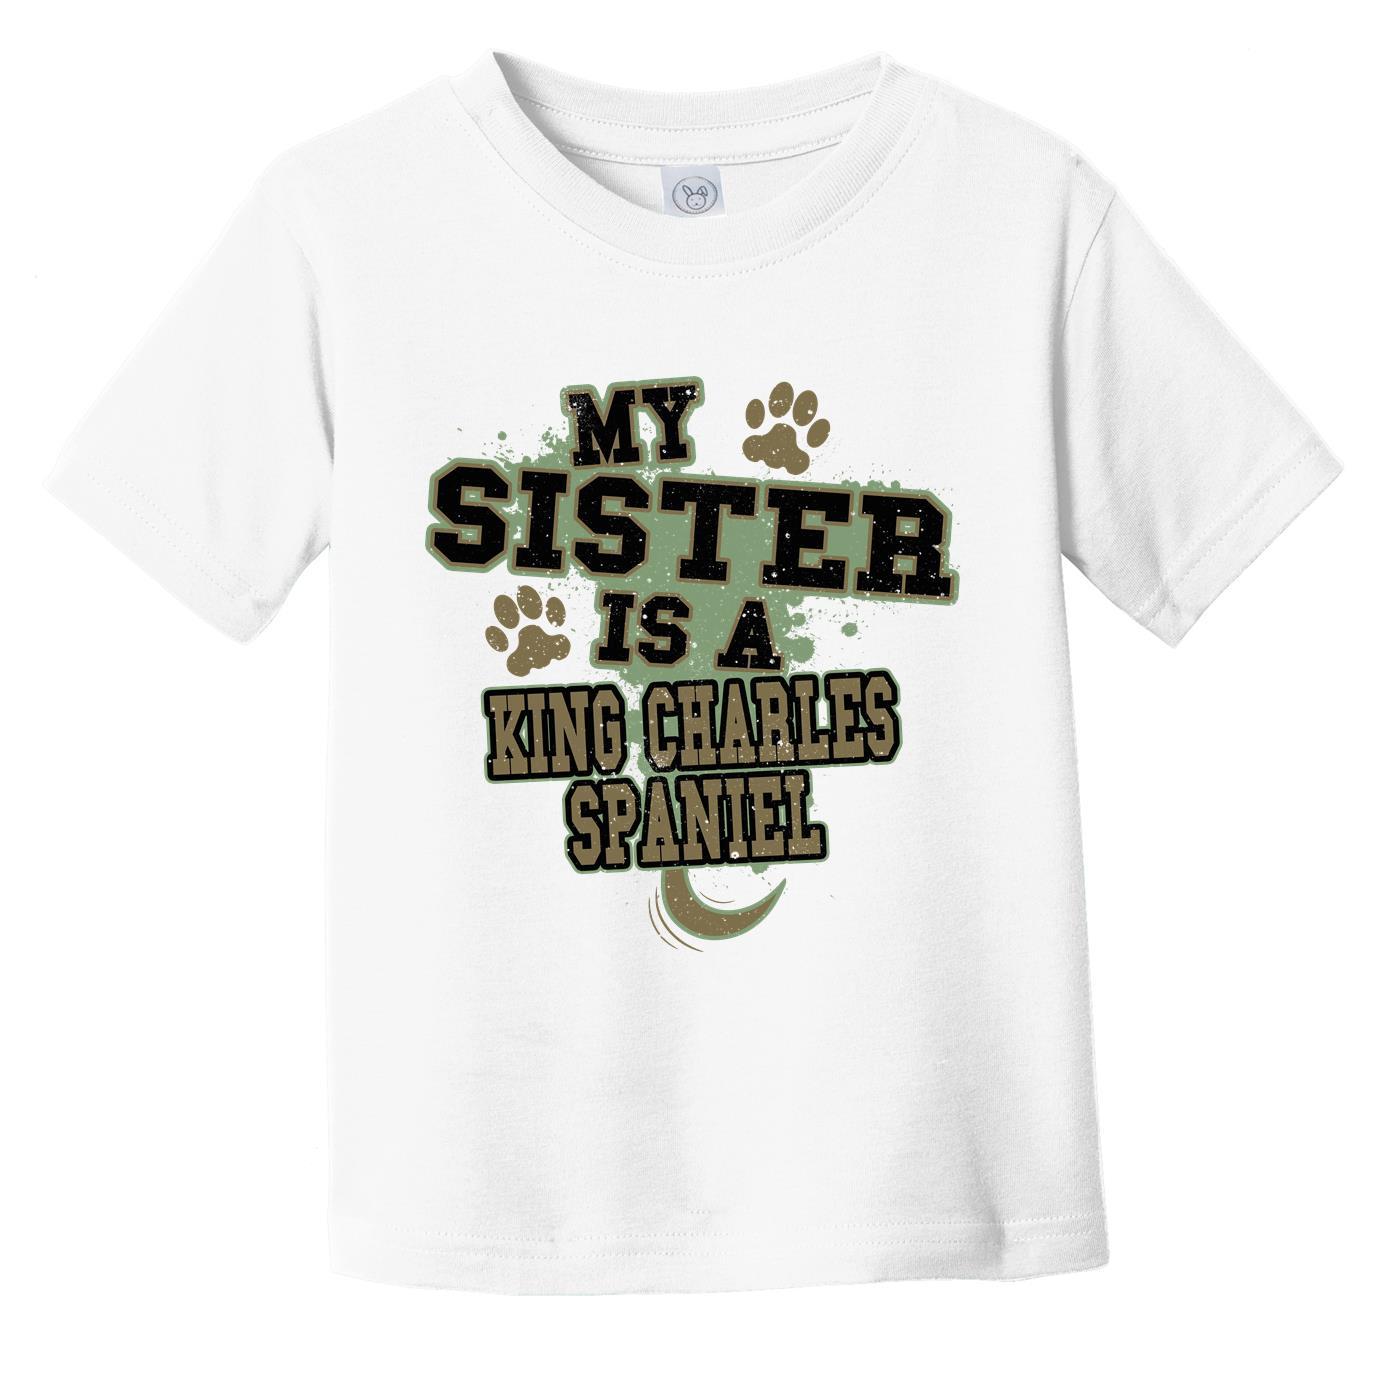 My Sister Is A King Charles Spaniel Funny Dog Infant Toddler T-Shirt